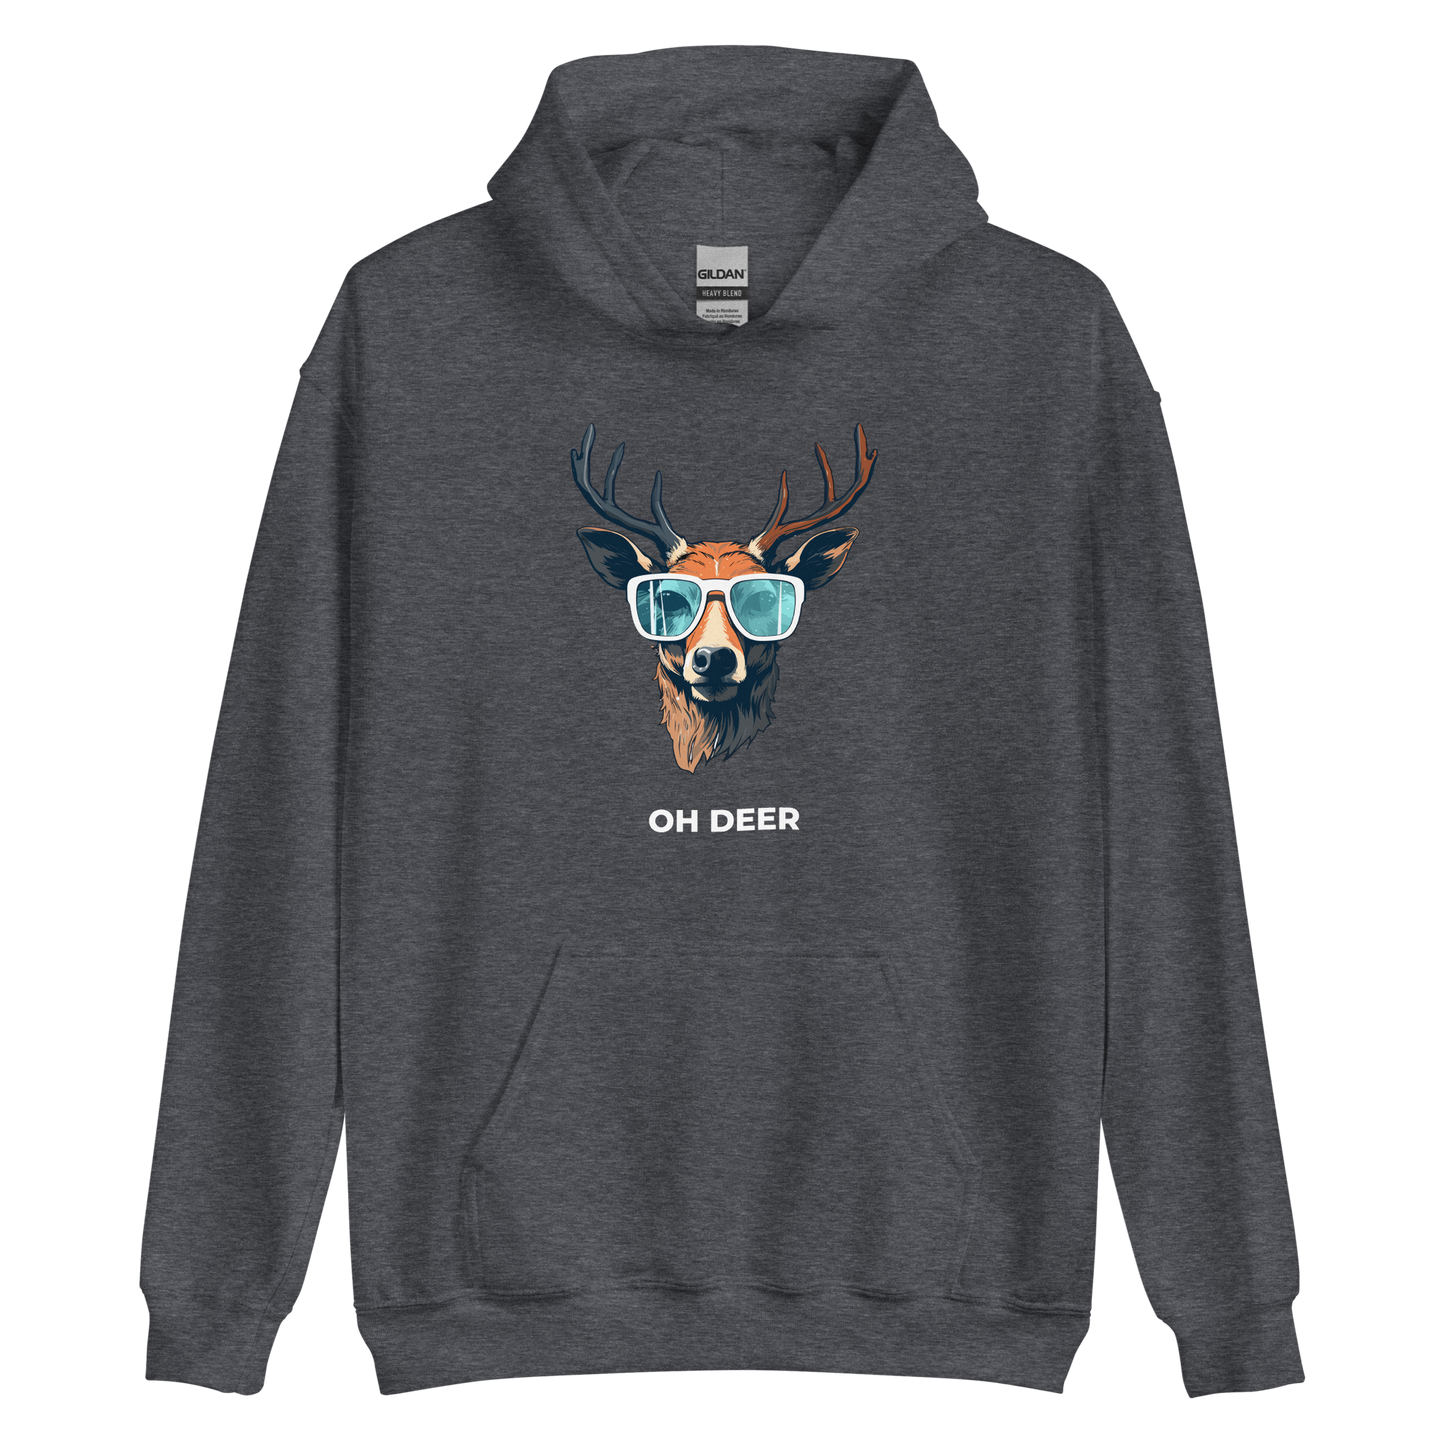 Dark Heather Deer Hoodie featuring a hilarious Oh Deer graphic on the chest - Funny Graphic Deer Hoodies - Boozy Fox